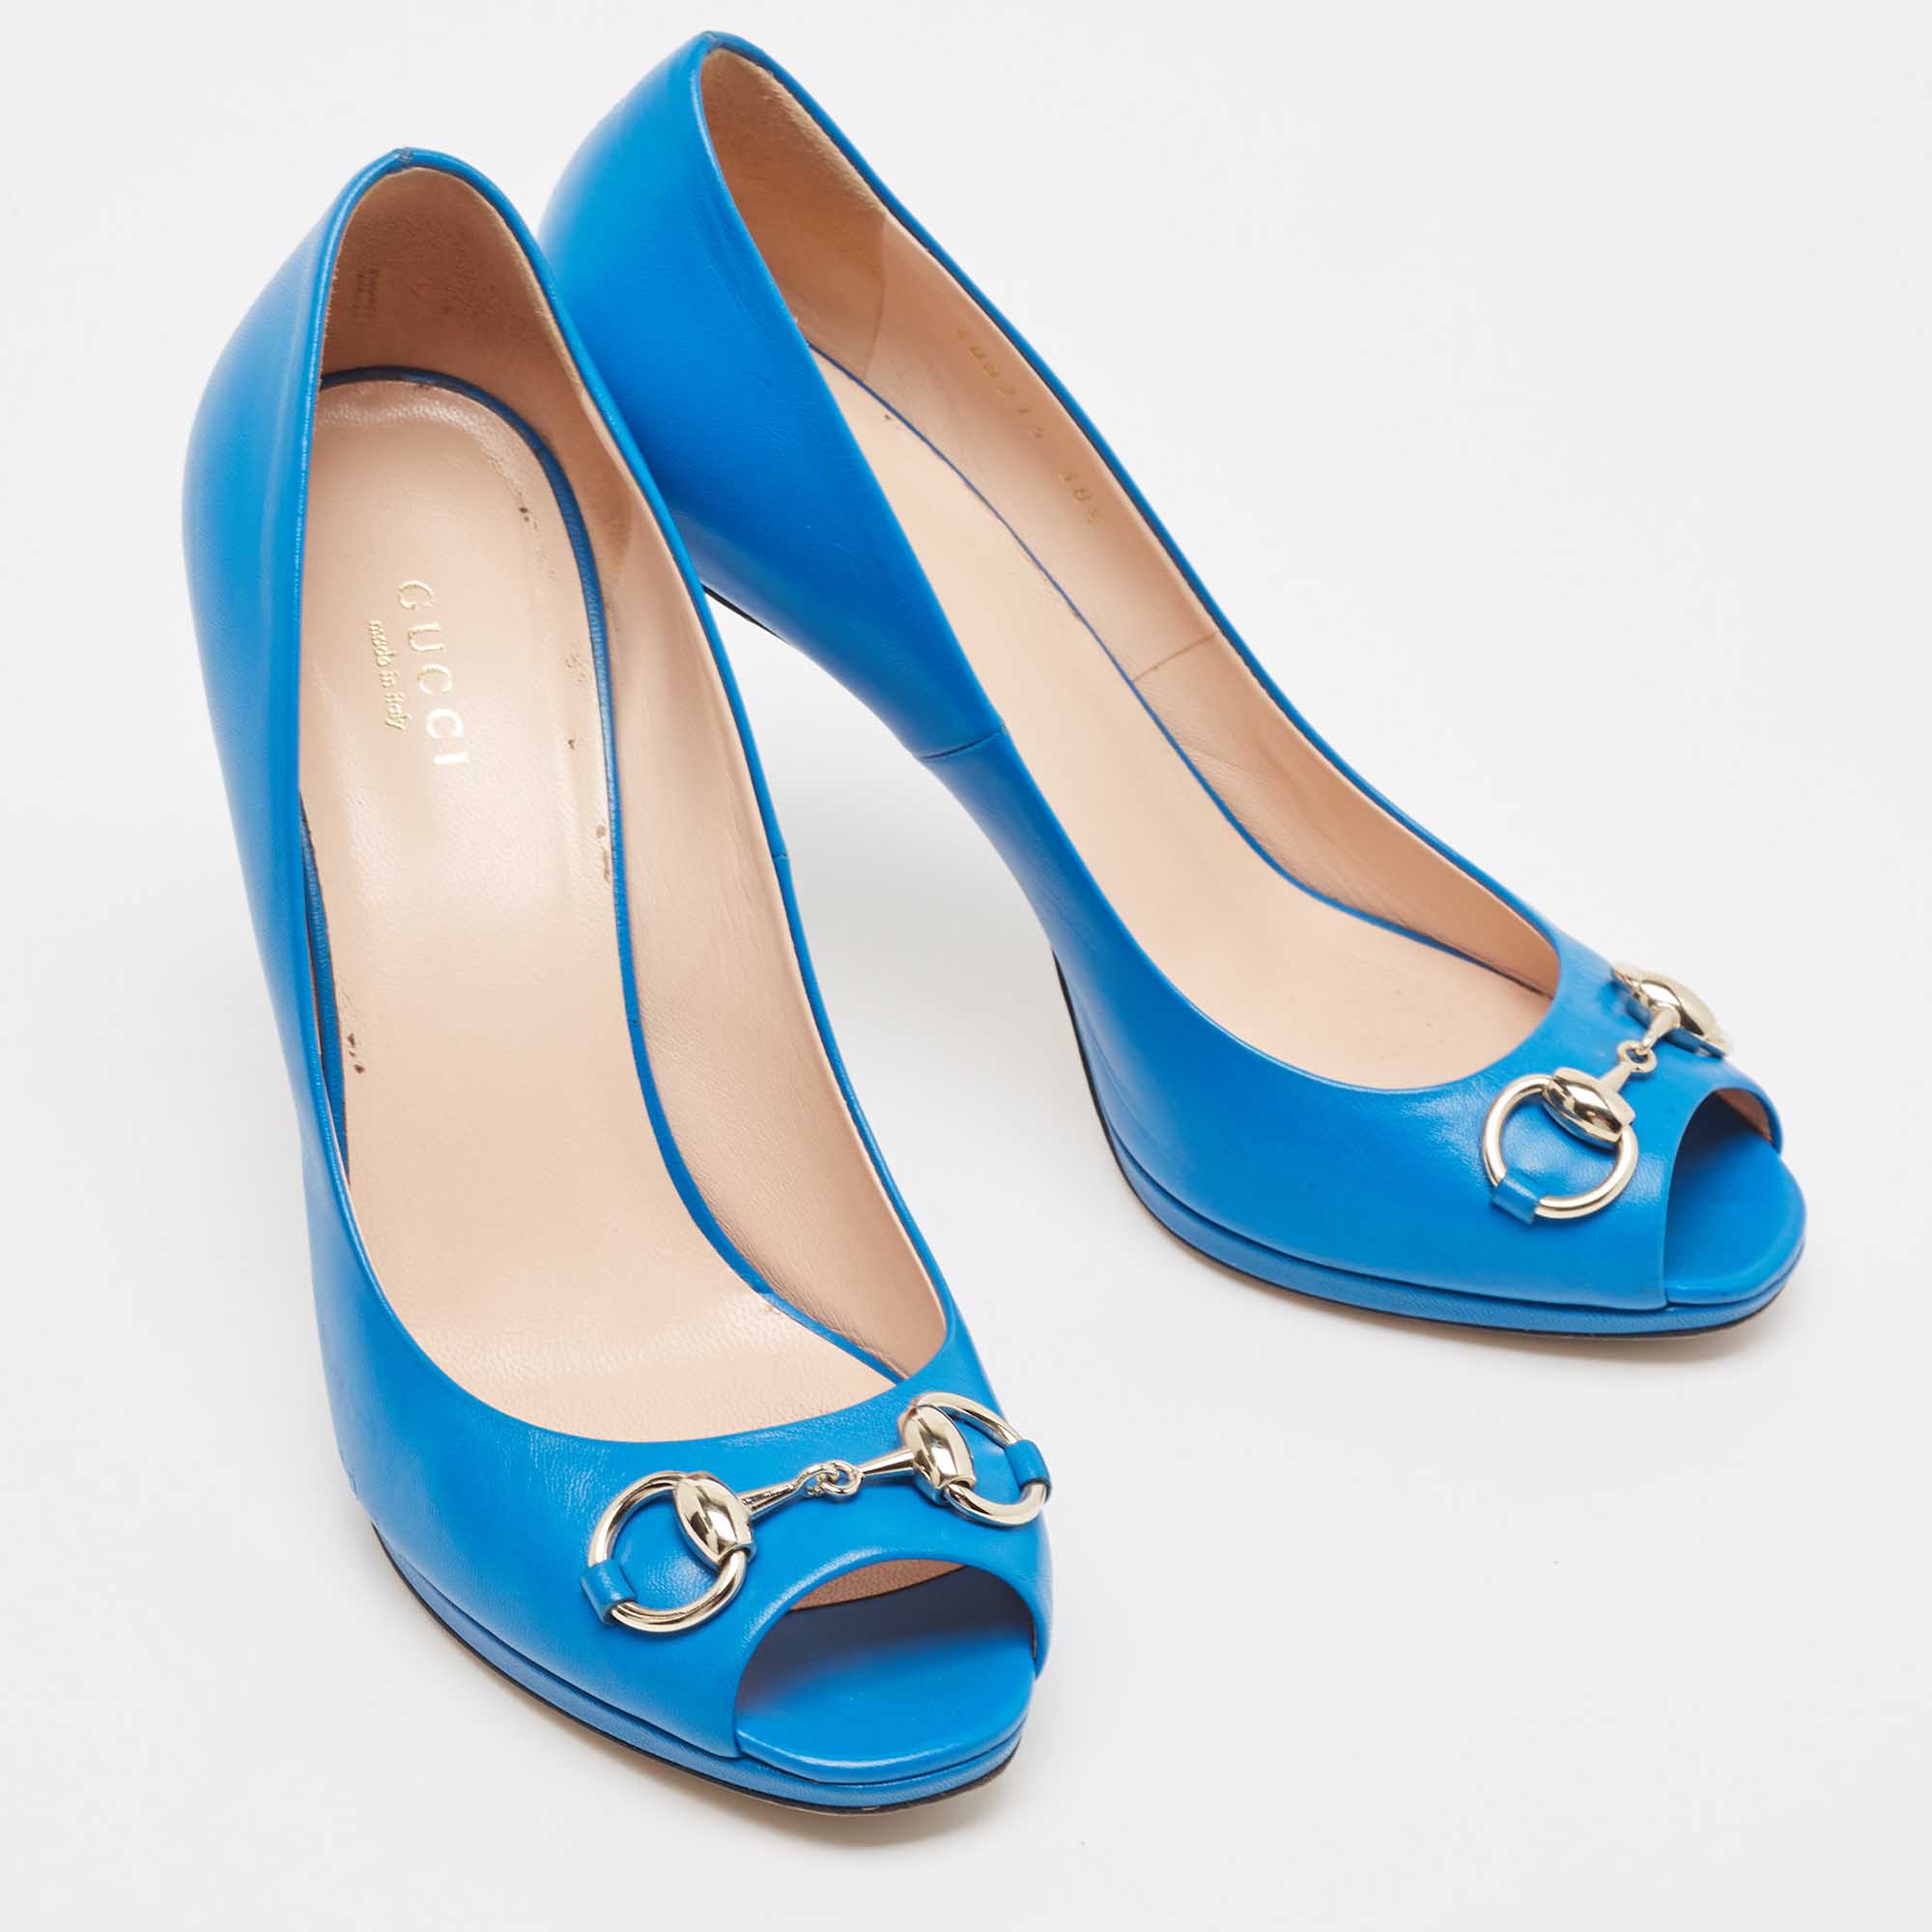 Gucci Blue Leather New Hollywood Platform Pumps Size 38.5